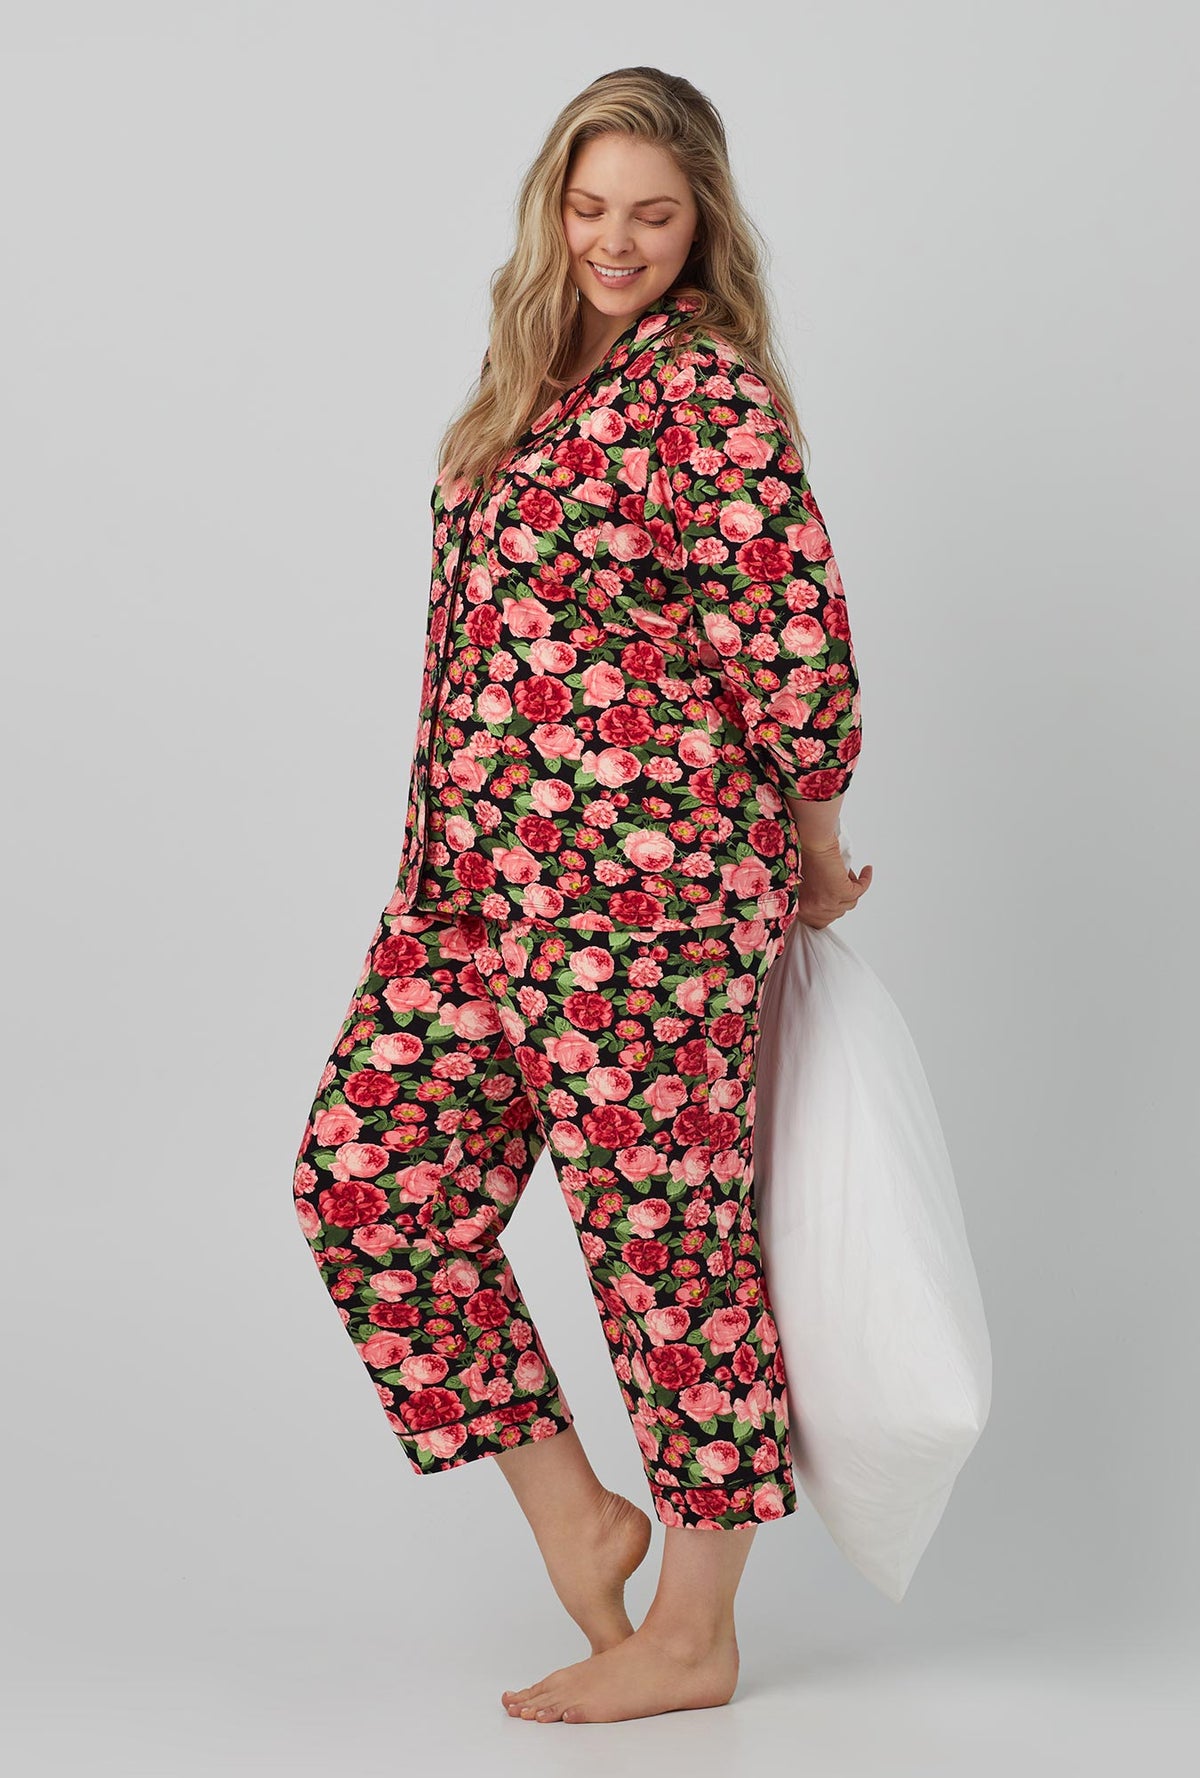 A lady wearing 3/4 Sleeve Classic Stretch Jersey Cropped PJ Set with Roses are Red print